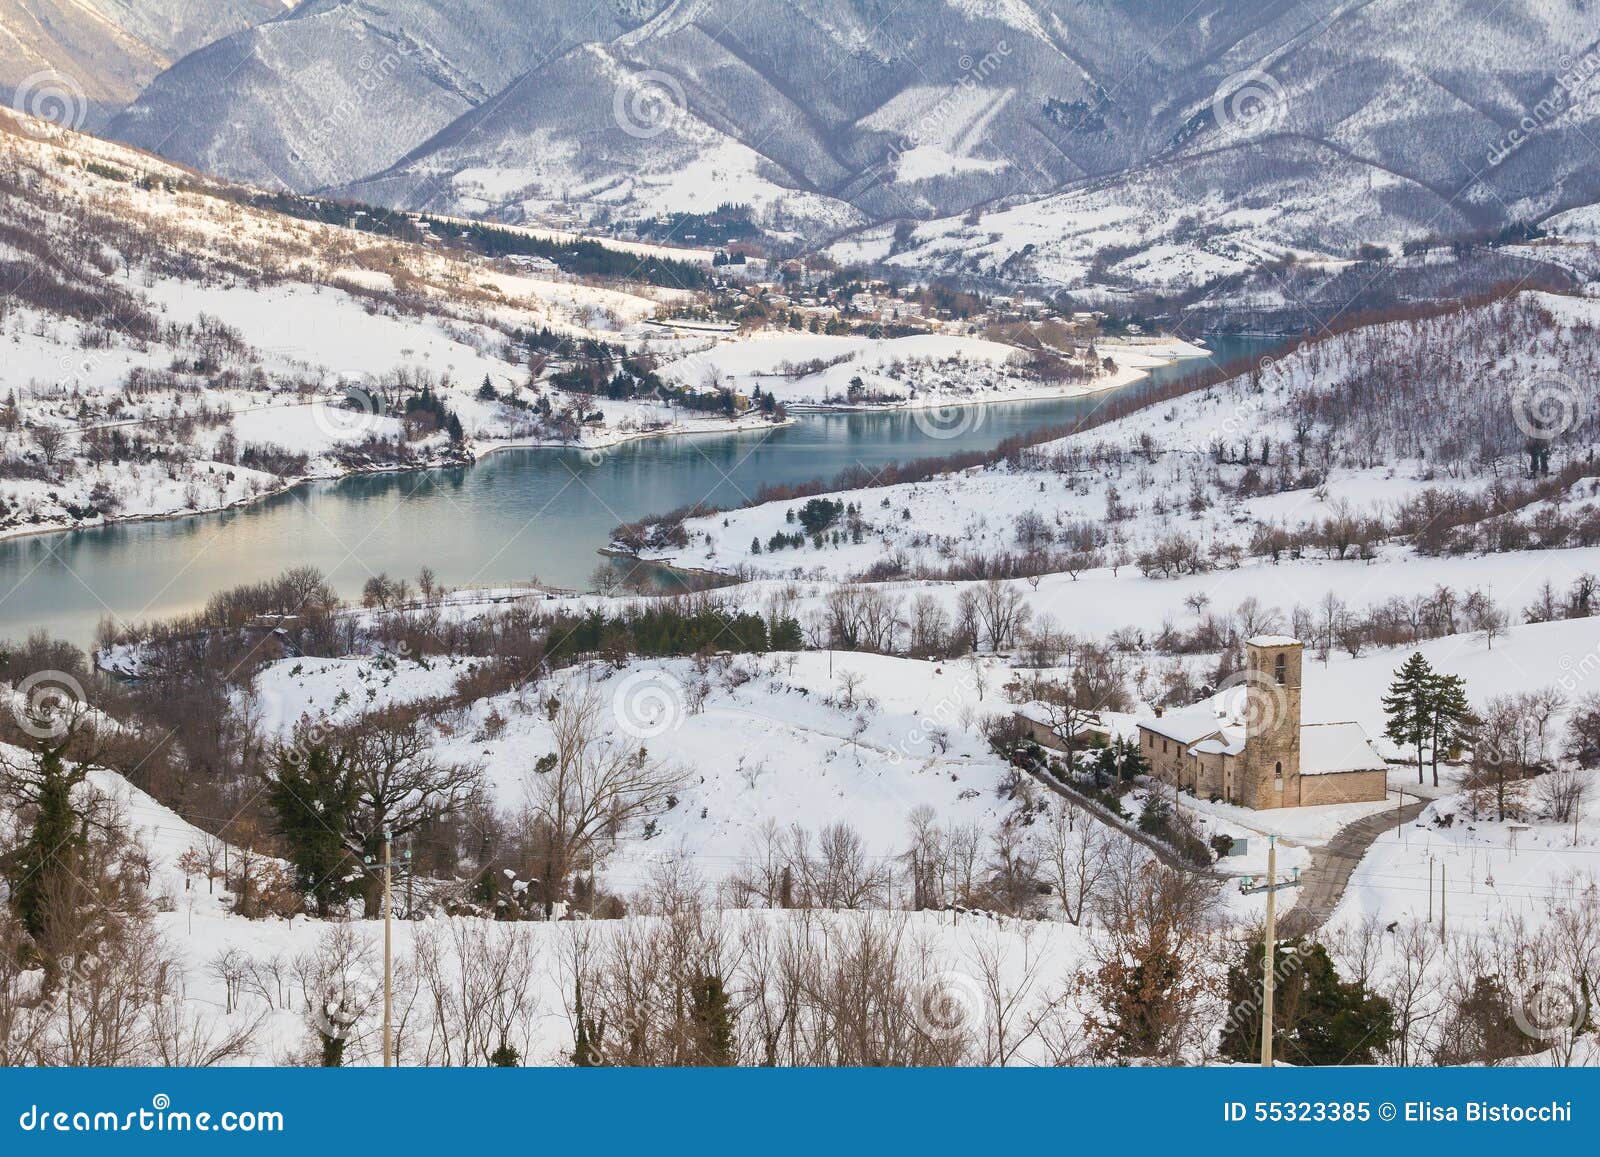 fiastra lake with snow on the national park of sibillini mountains